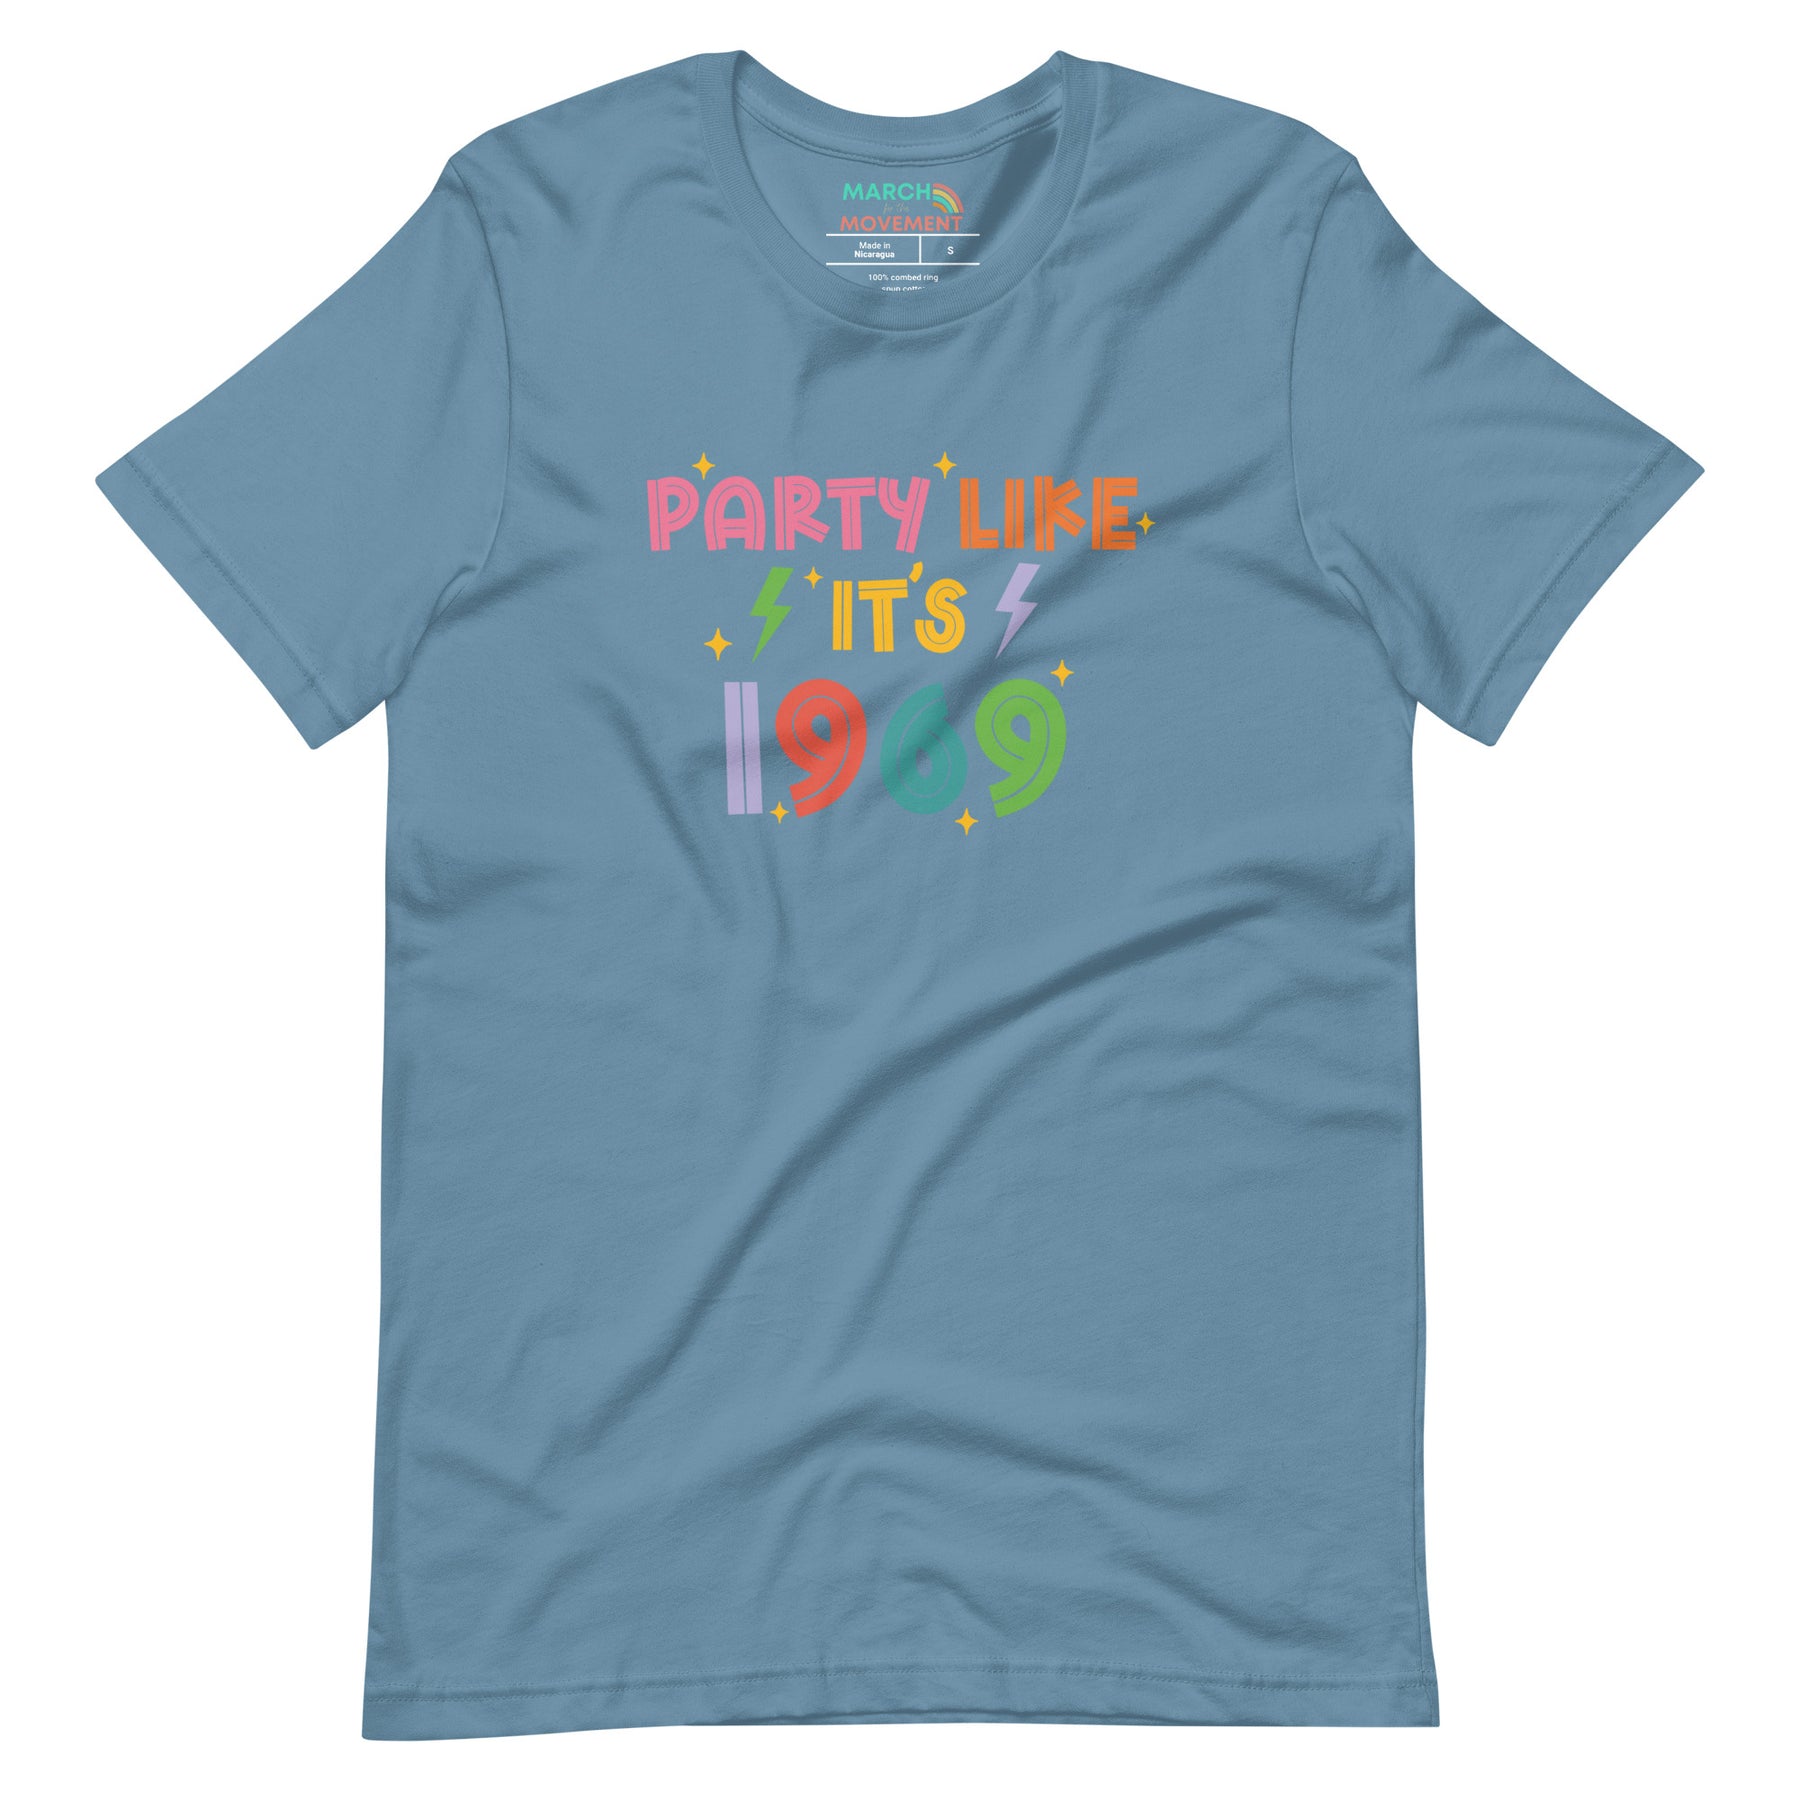 Party Like It's 1969 Pride T-Shirt